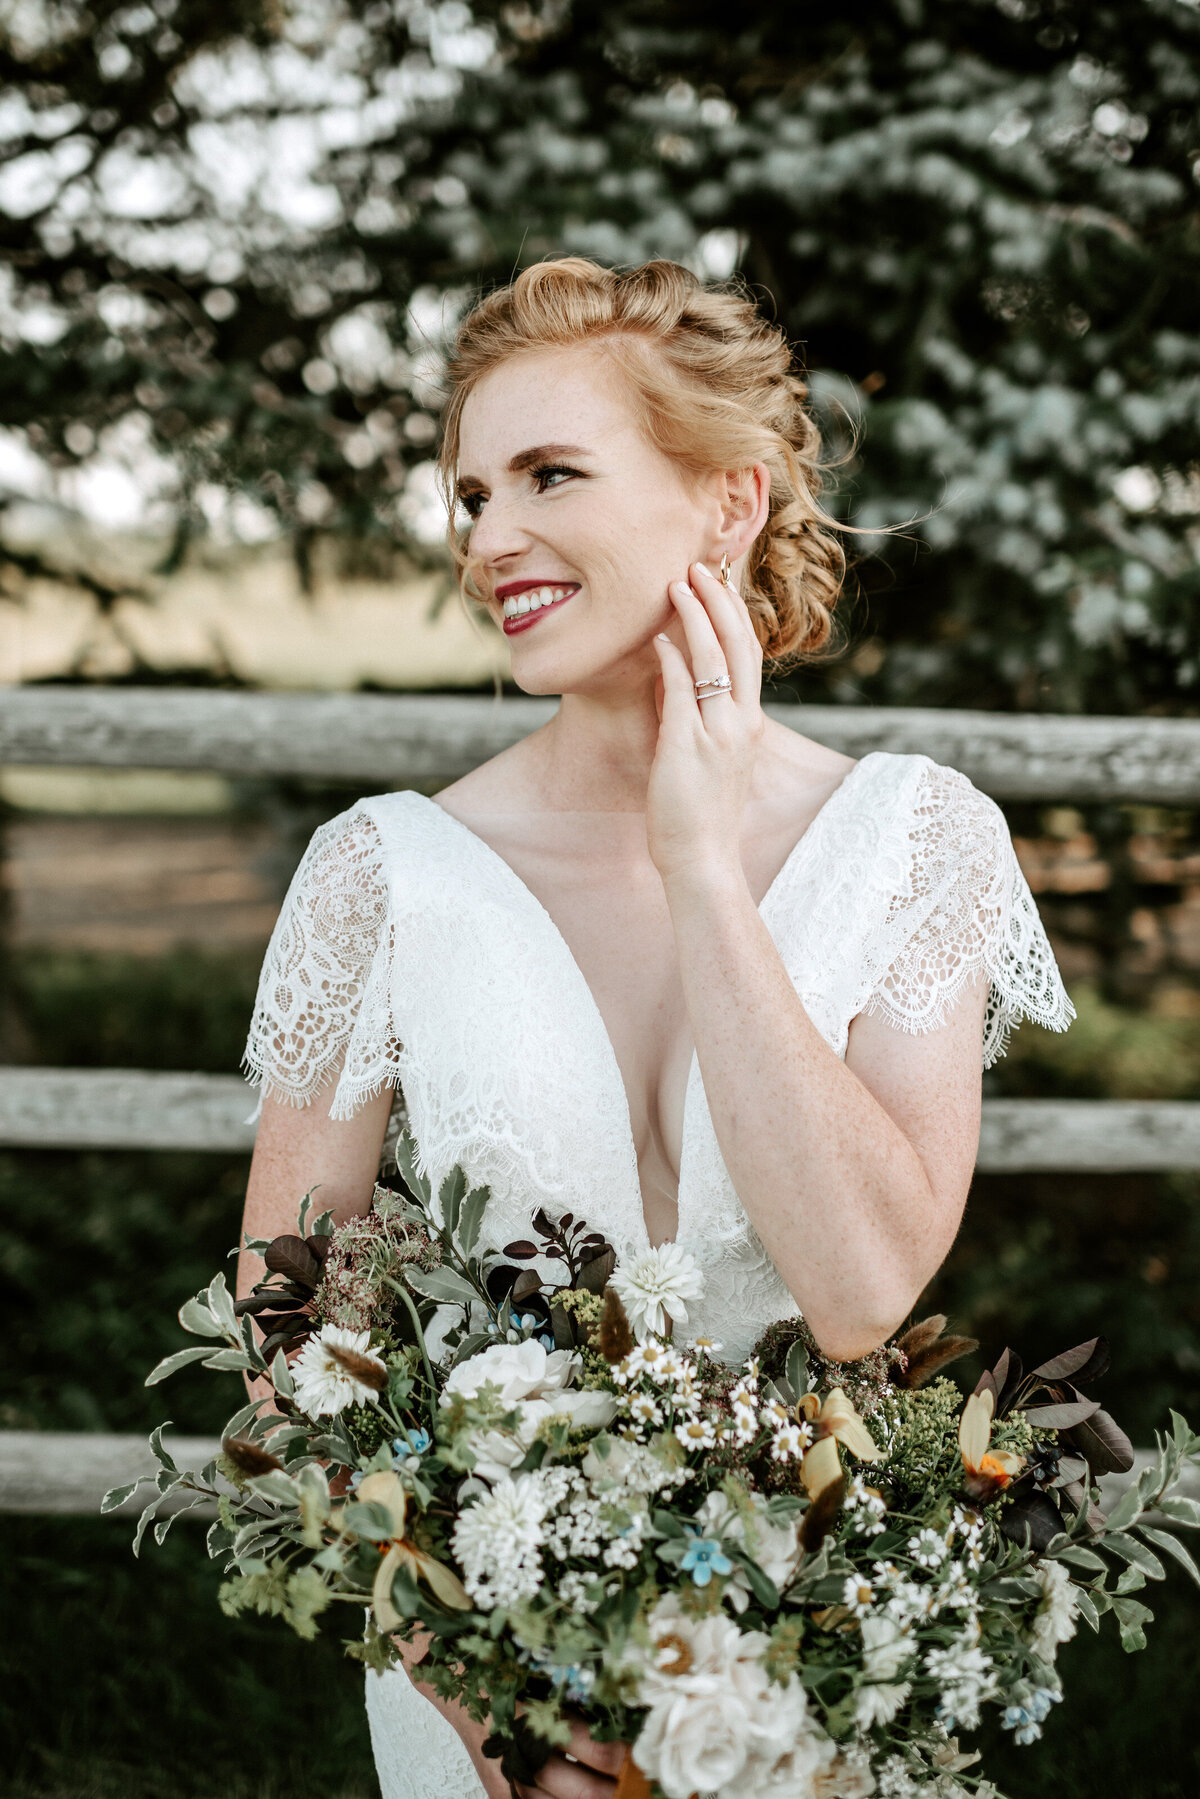 floral-and-field-design-bespoke-wedding-floral-styling-calgary-alberta-country-trails-8